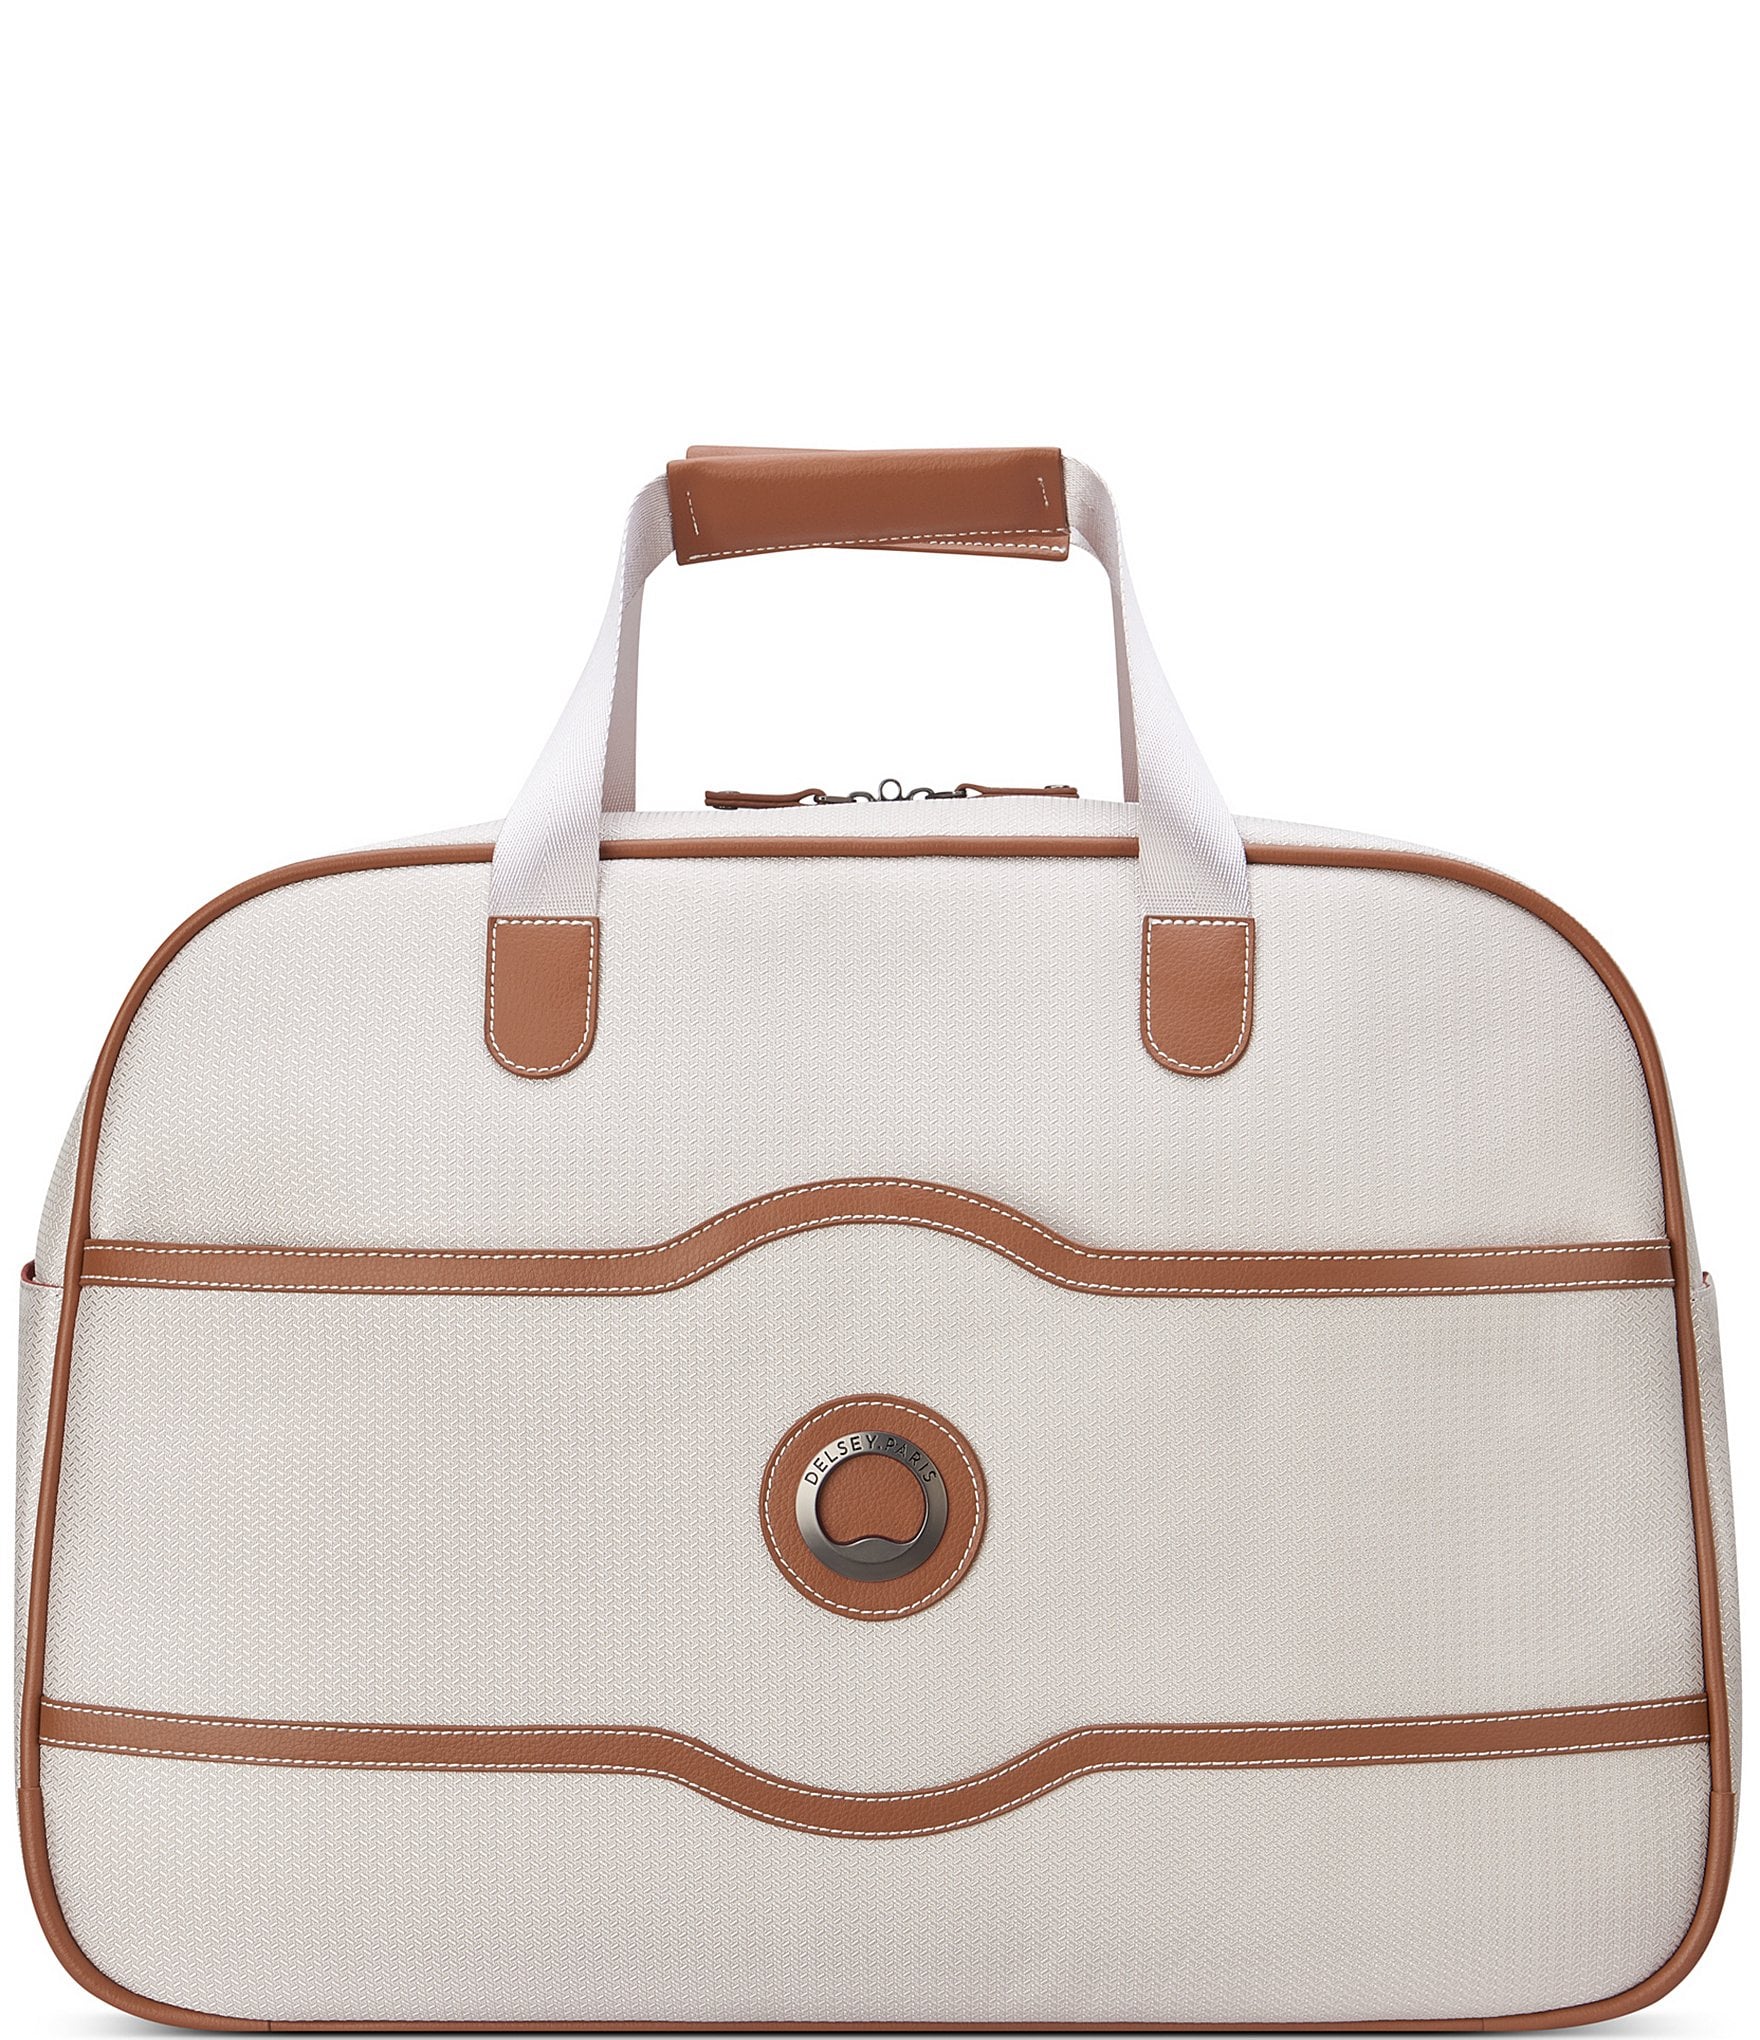 Delsey Paris Chatelet Soft Side Luggage Collection